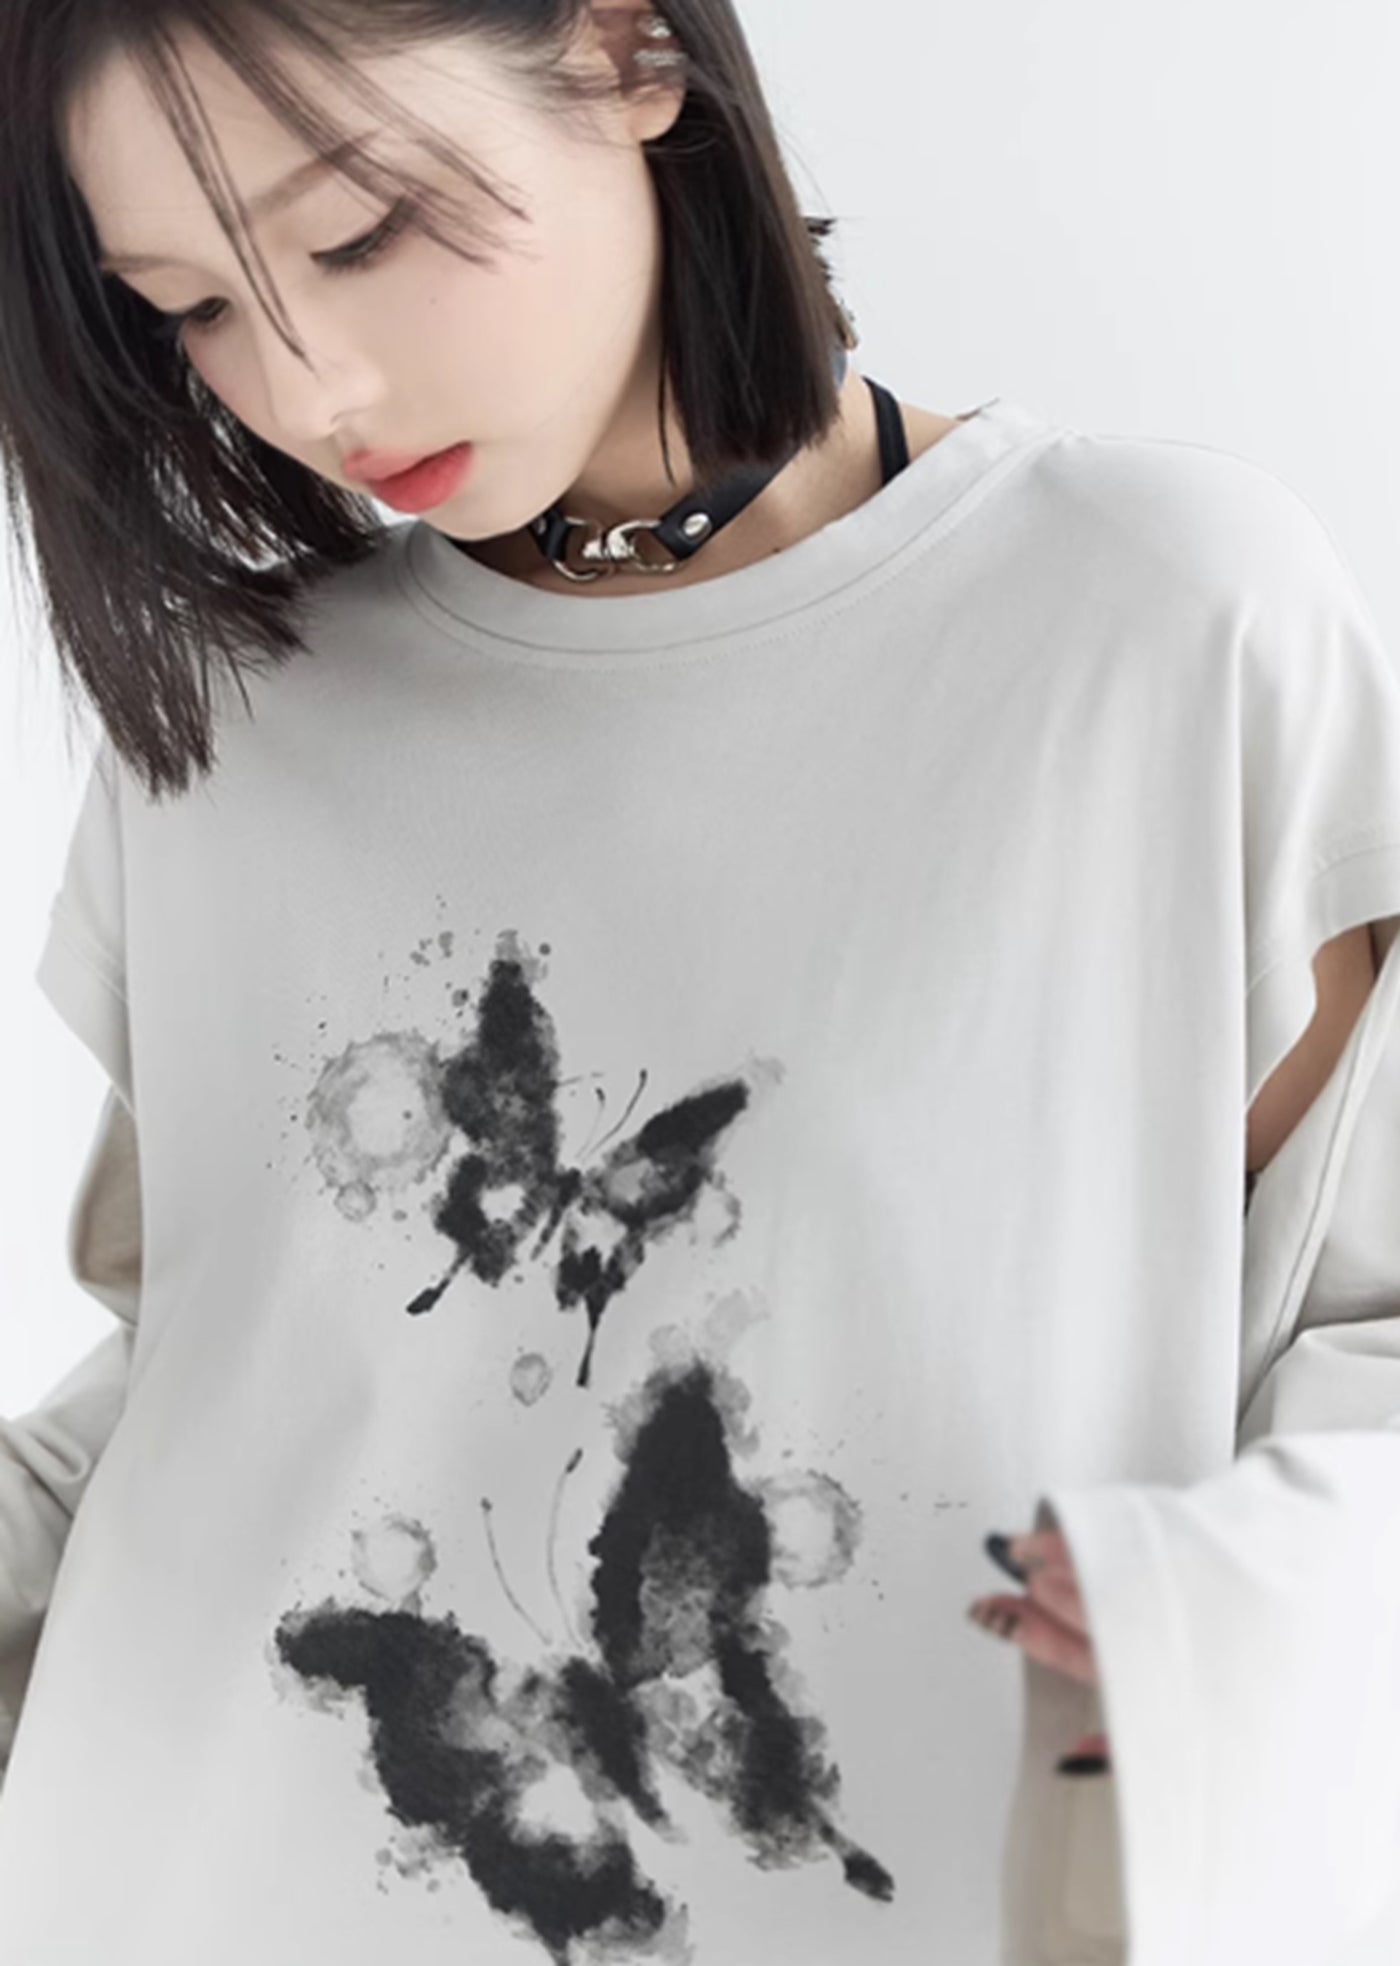 [Universal Gravity Museum] Two butterfly design simple monotone long sleeve T-shirt UG0040